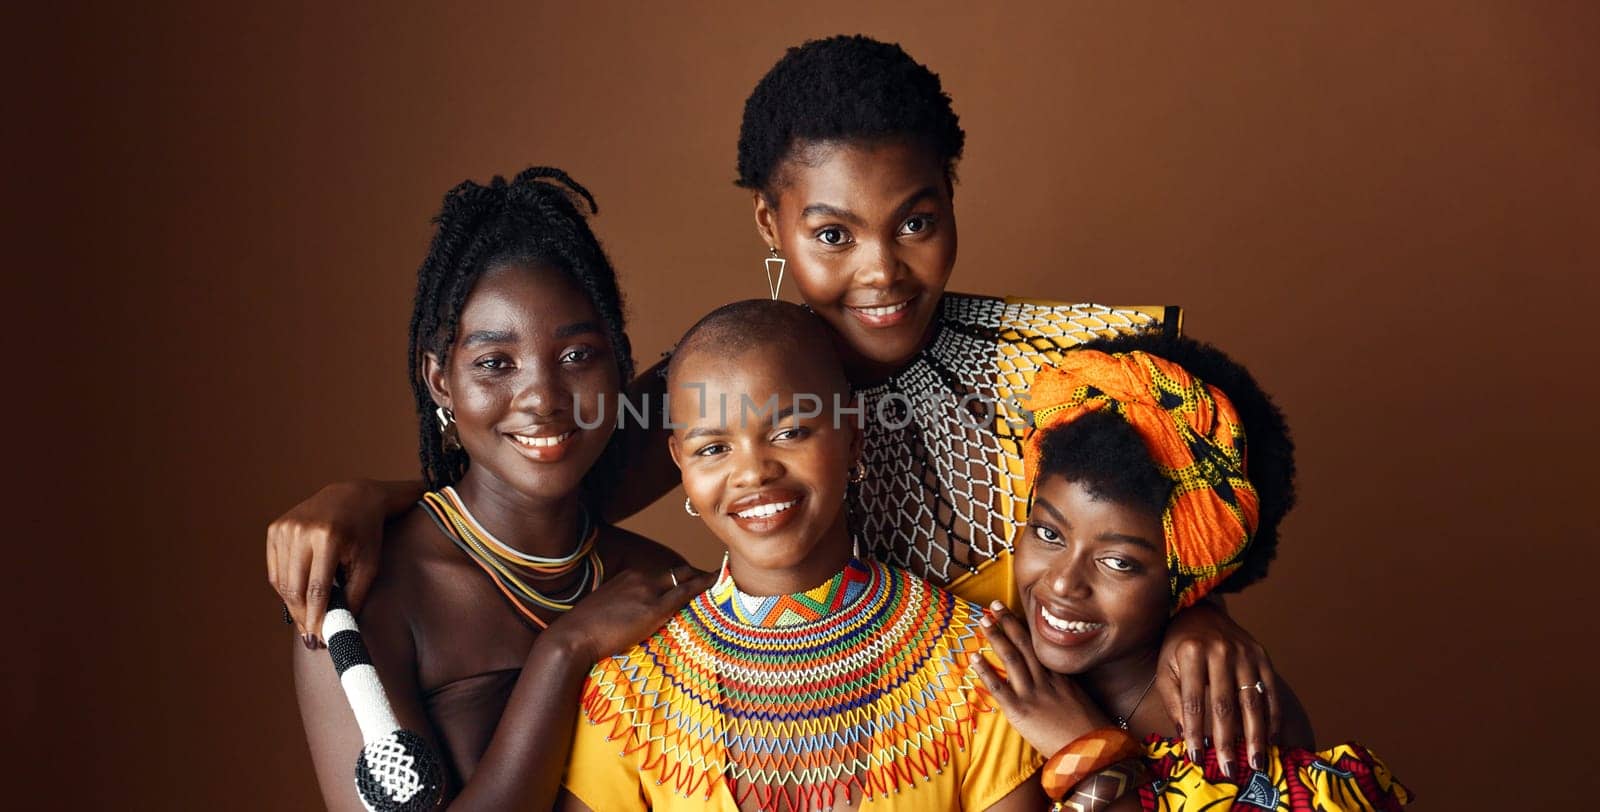 Fashion, beauty and heritage with group of black women in studio on brown background together for support. Portrait, smile and culture with happy African people in clothes of tradition for community by YuriArcurs